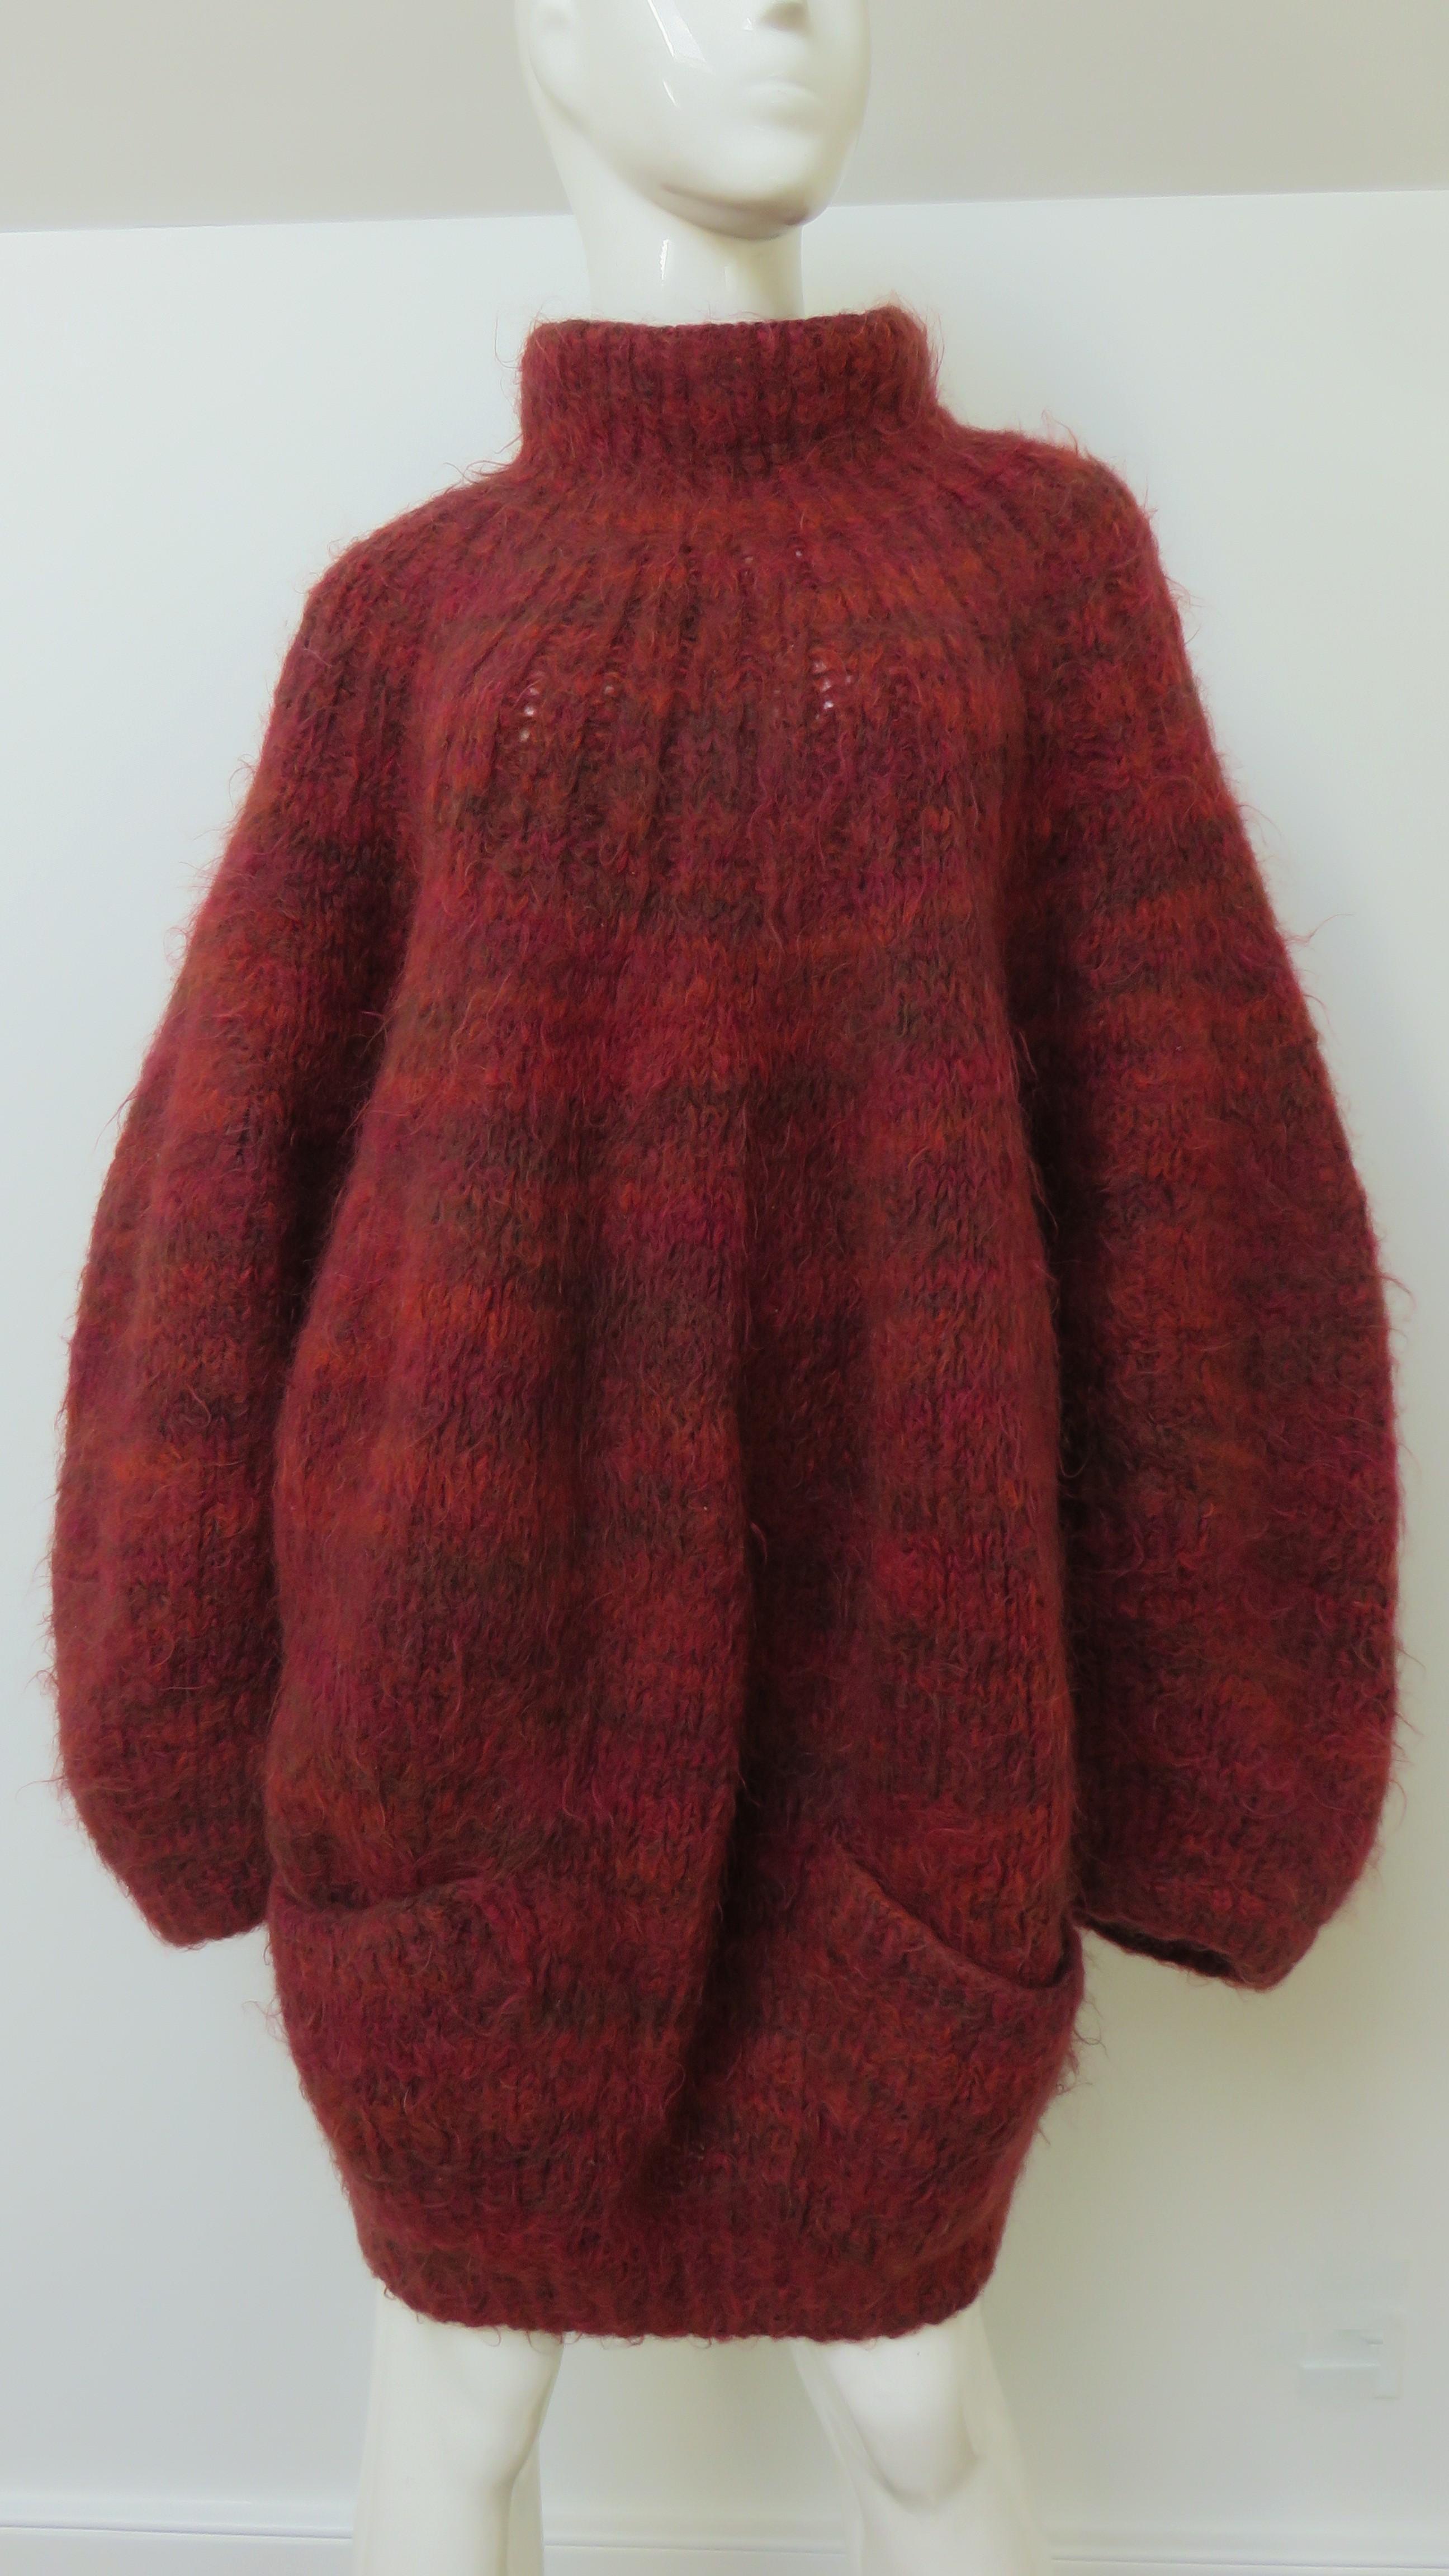 A fabulous wool knit oversized sweater in shades of burgundy from the great but all too brief career of American designer Perry Ellis. It has a standup collar, front patch pockets and ribbing at the hem.
Marked One Size.